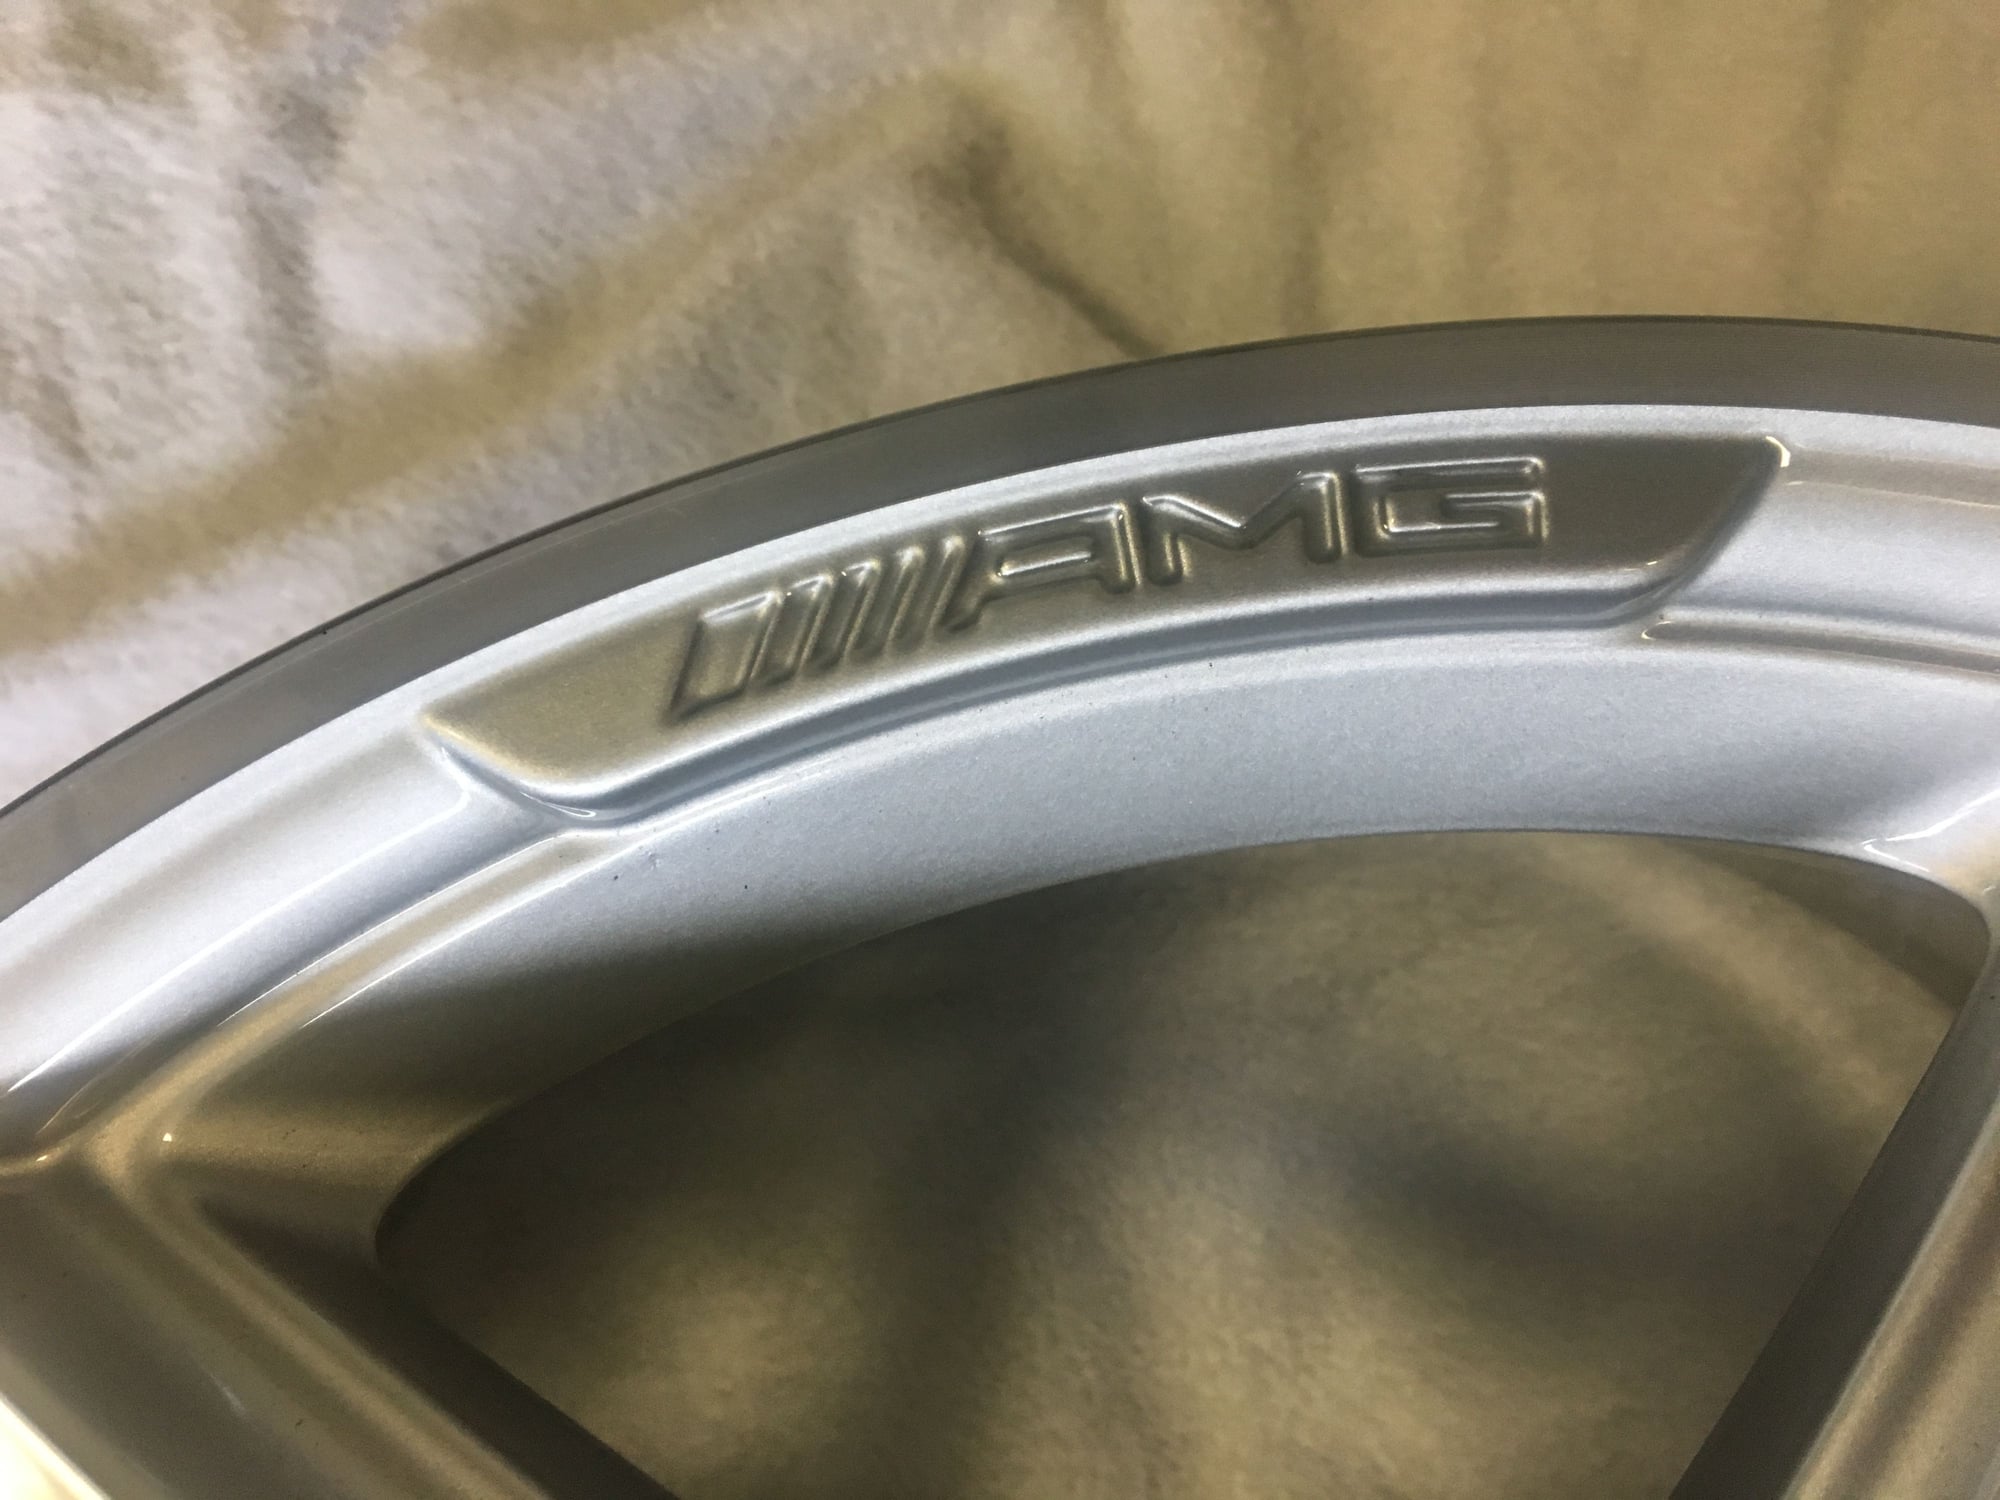 Wheels and Tires/Axles - E550, e350 18 inch front wheel - Used - 2010 to 2014 Mercedes-Benz E350 - 2010 to 2014 Mercedes-Benz E550 - Oakland, CA 94619, United States